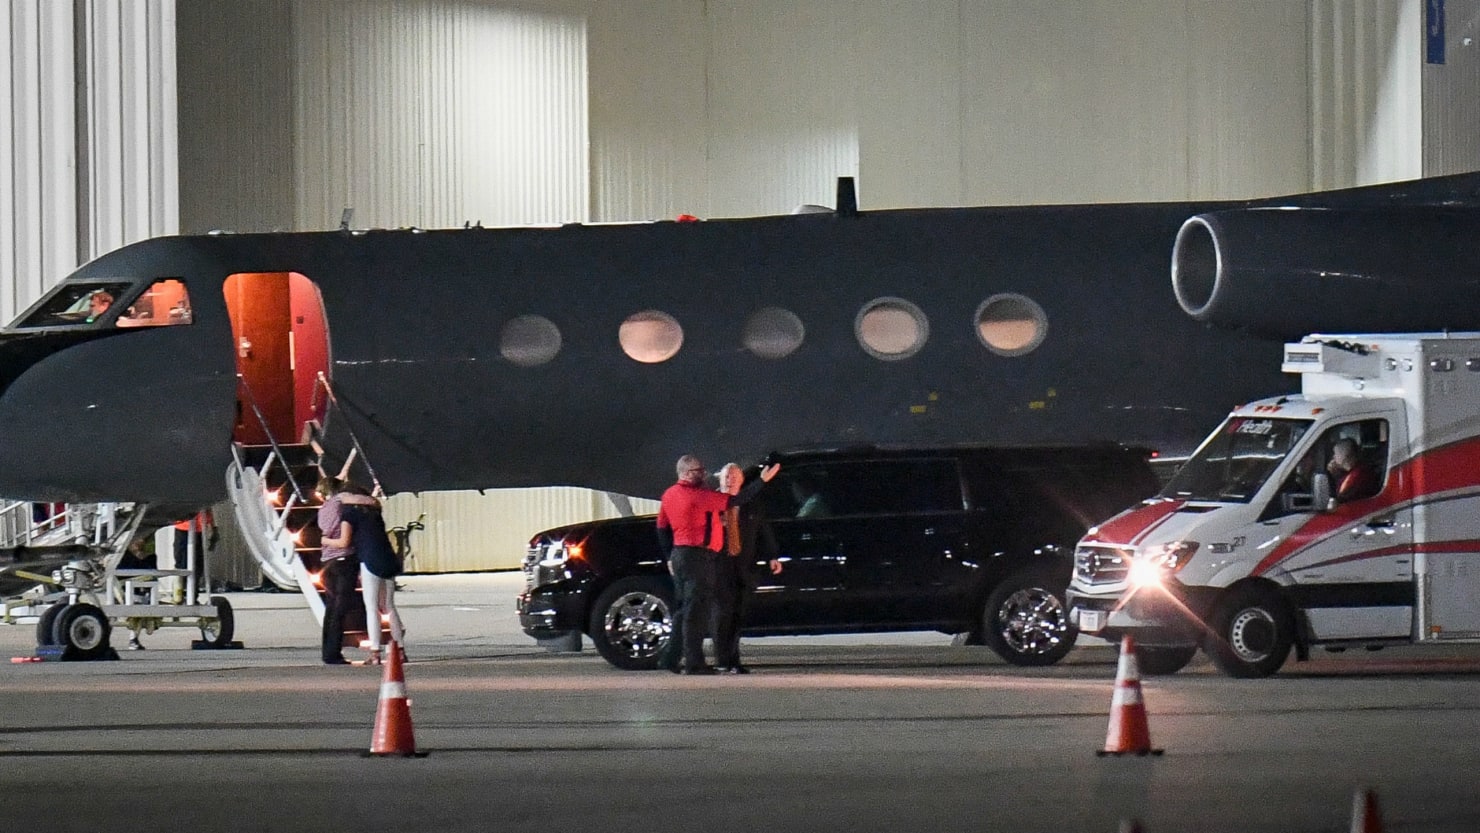 Otto Warmbier Arrives Home After Release From North Korea1480 x 833